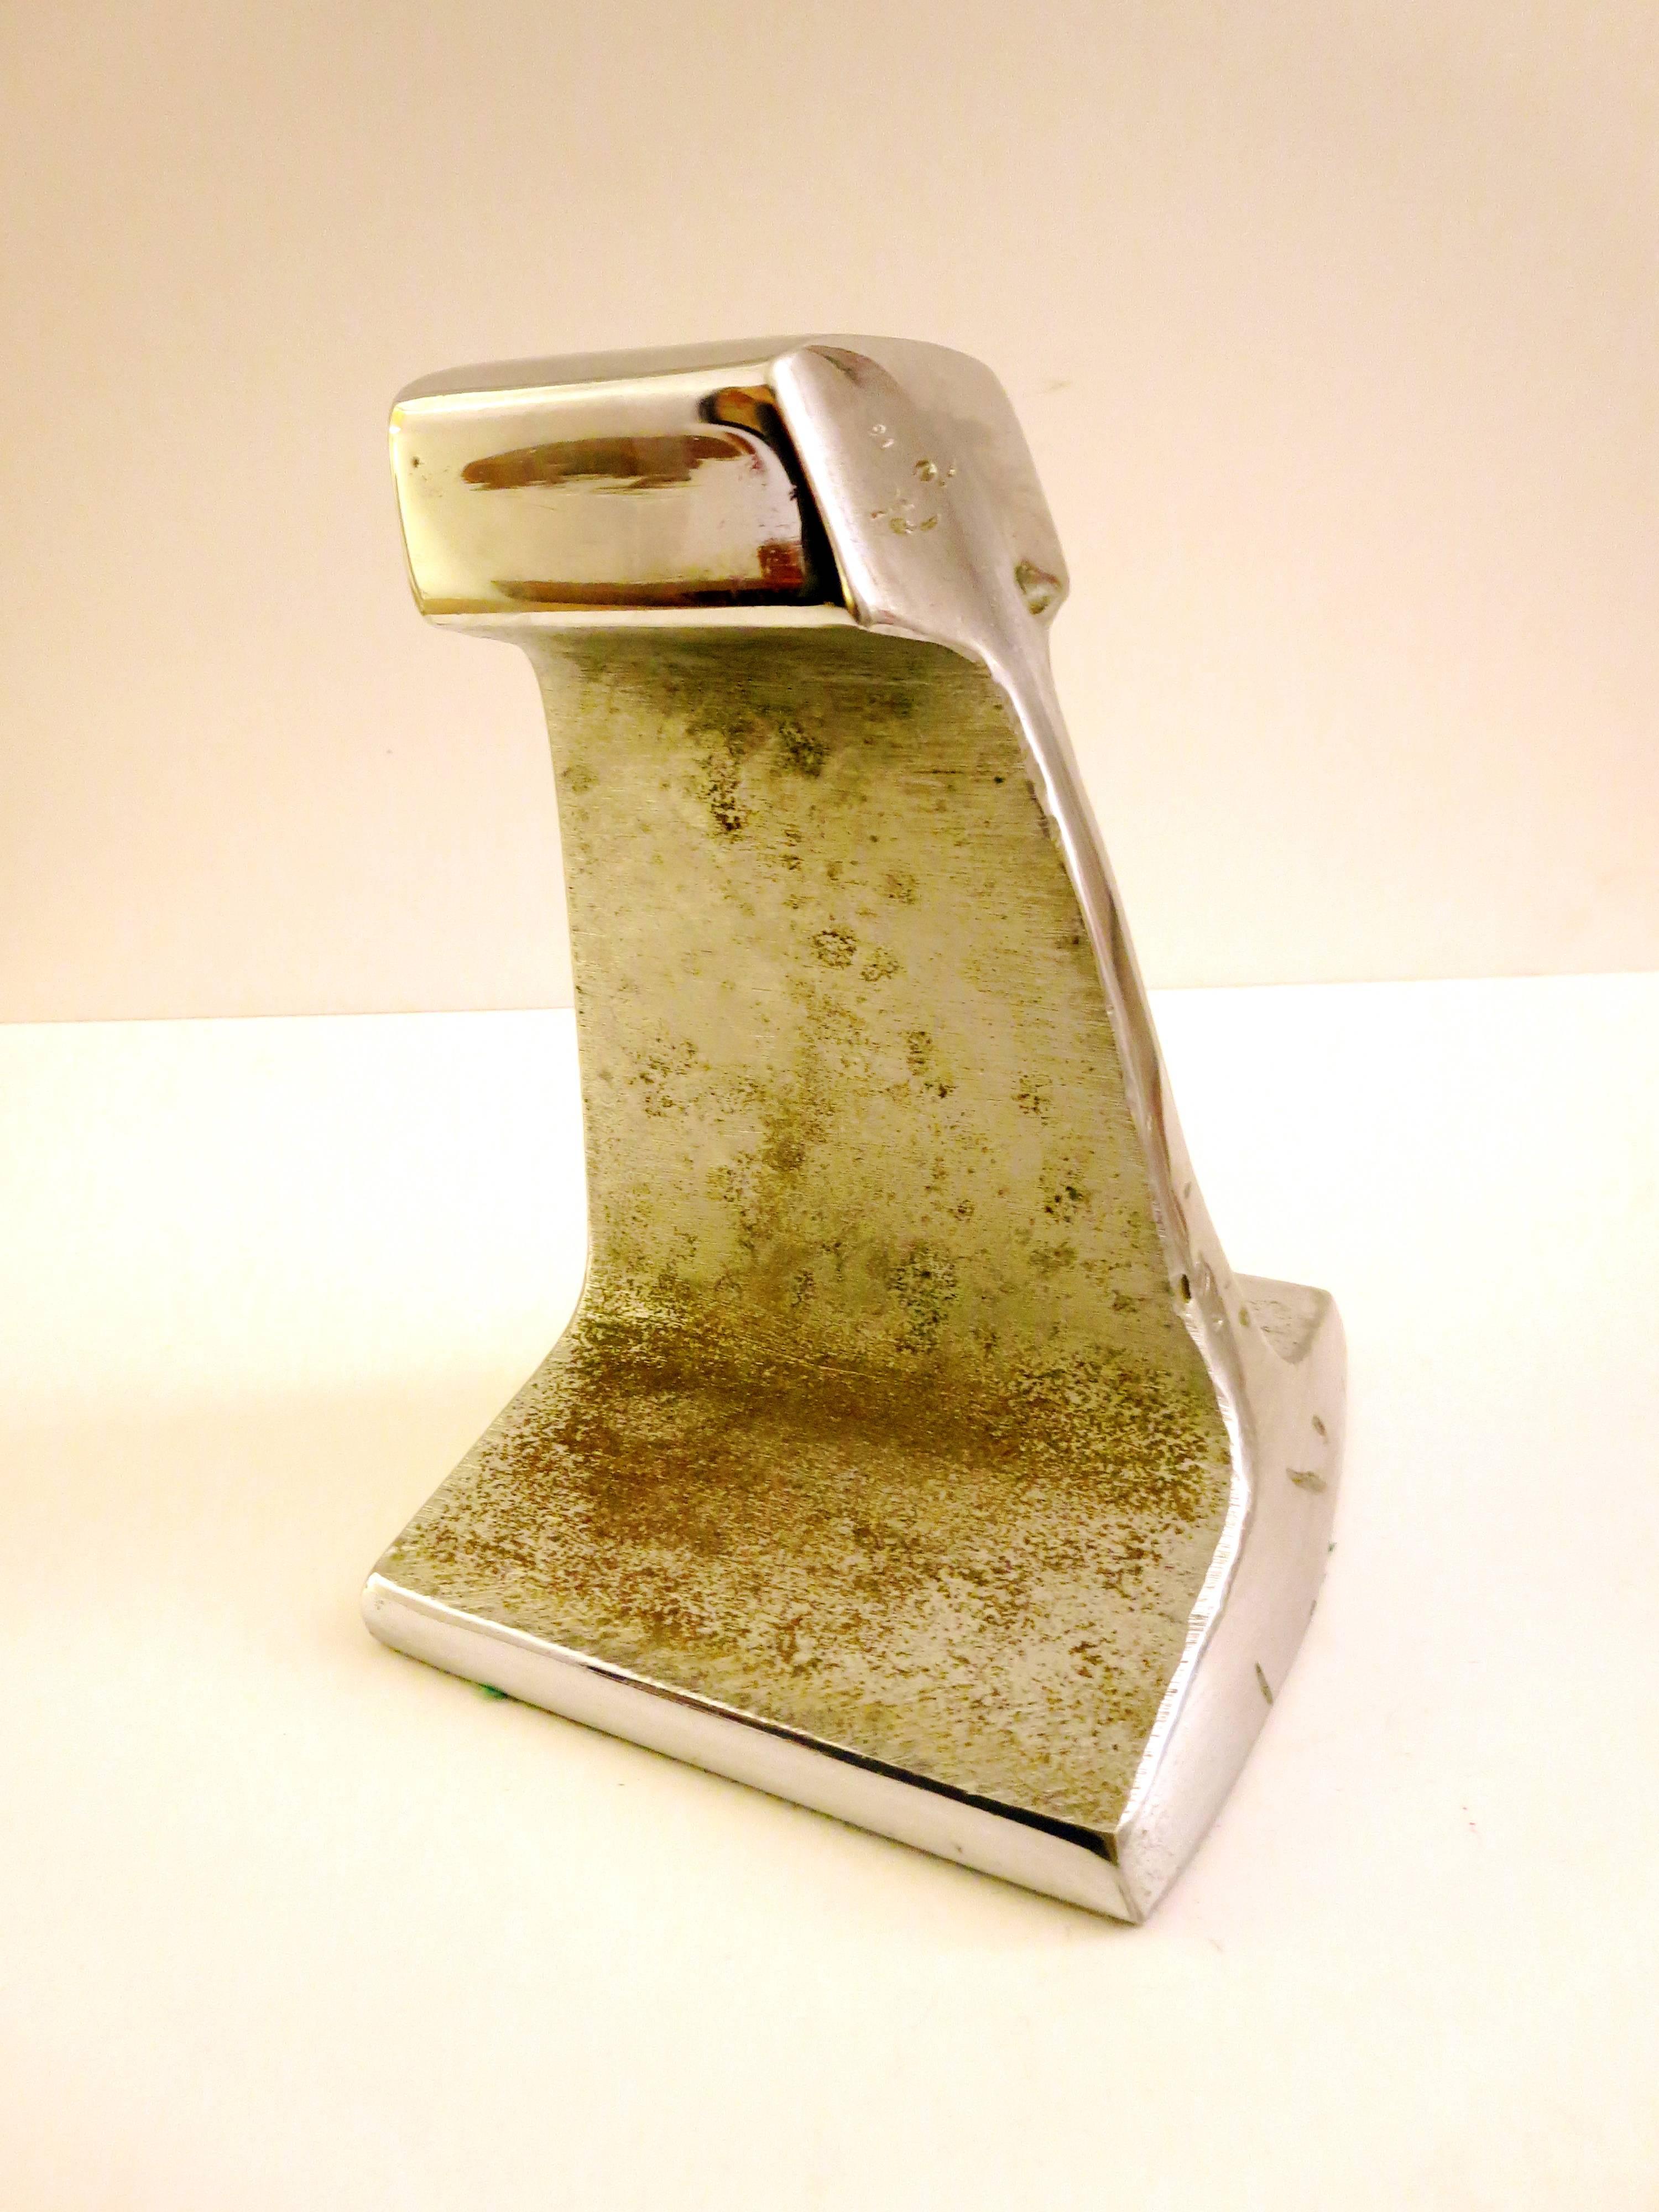 20th Century One of a Kind Massive I-Beam Solid Steel Bookend/Door Stopper in a Chrome Finish